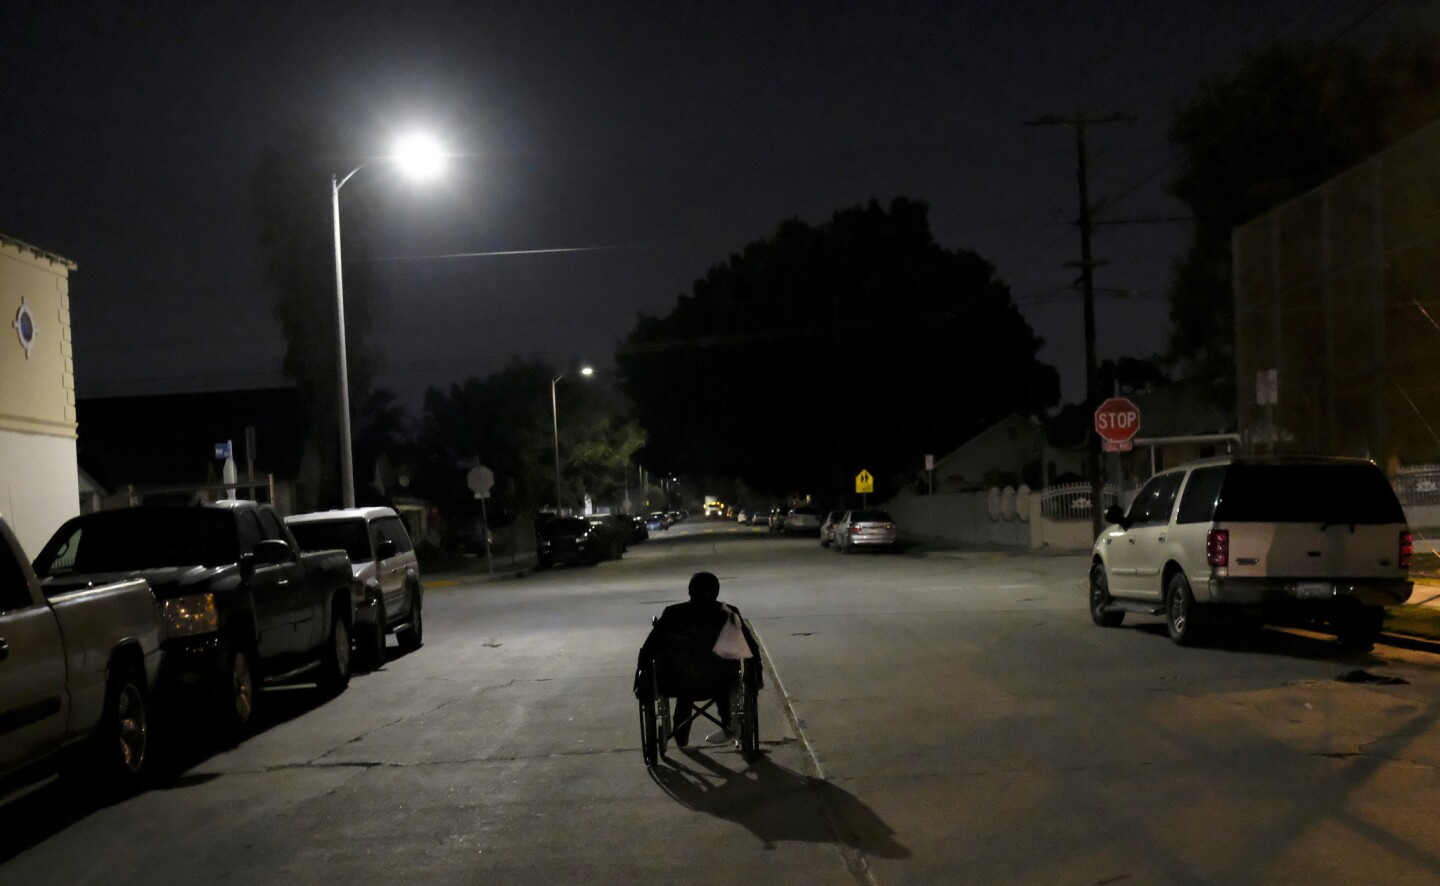 A woman pushes her wheelchair at night near South Hoover Street and West Florence Avenue in South Los Angeles. She was counted by volunteers in homeless count in South L.A.